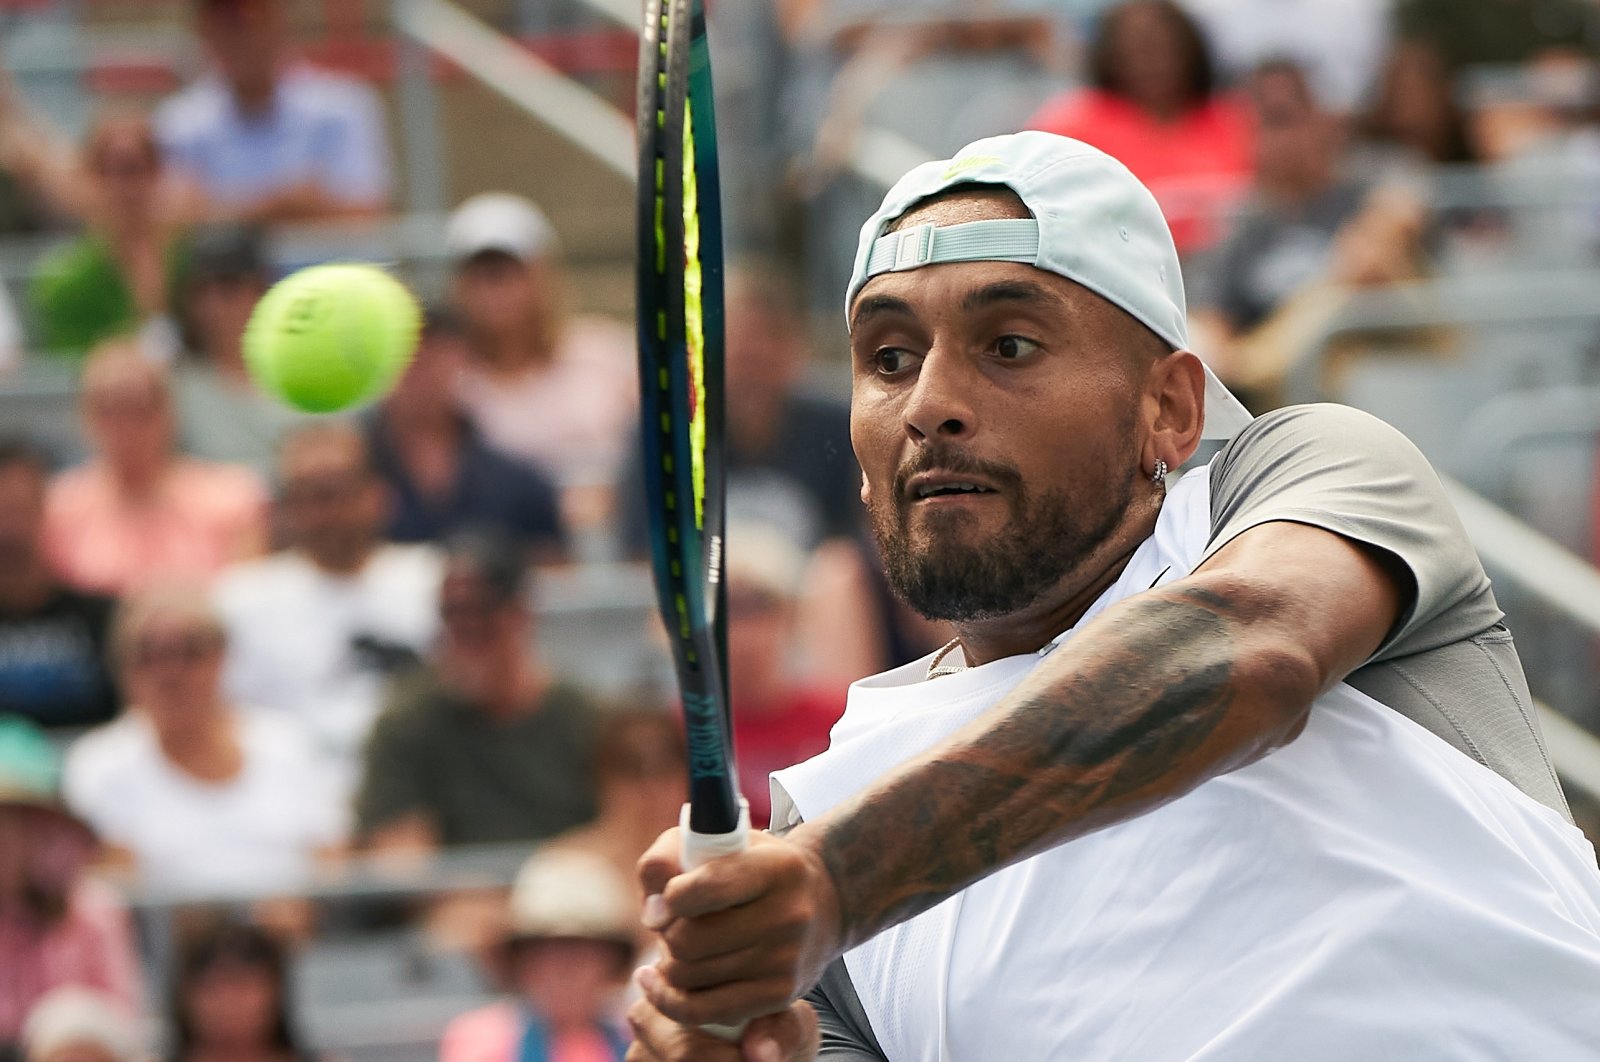 Nick Kyrgios in action against Daniil Medvedev during Canadian Open, Montreal, Canada, Aug. 10, 2022. (EPA Photo)